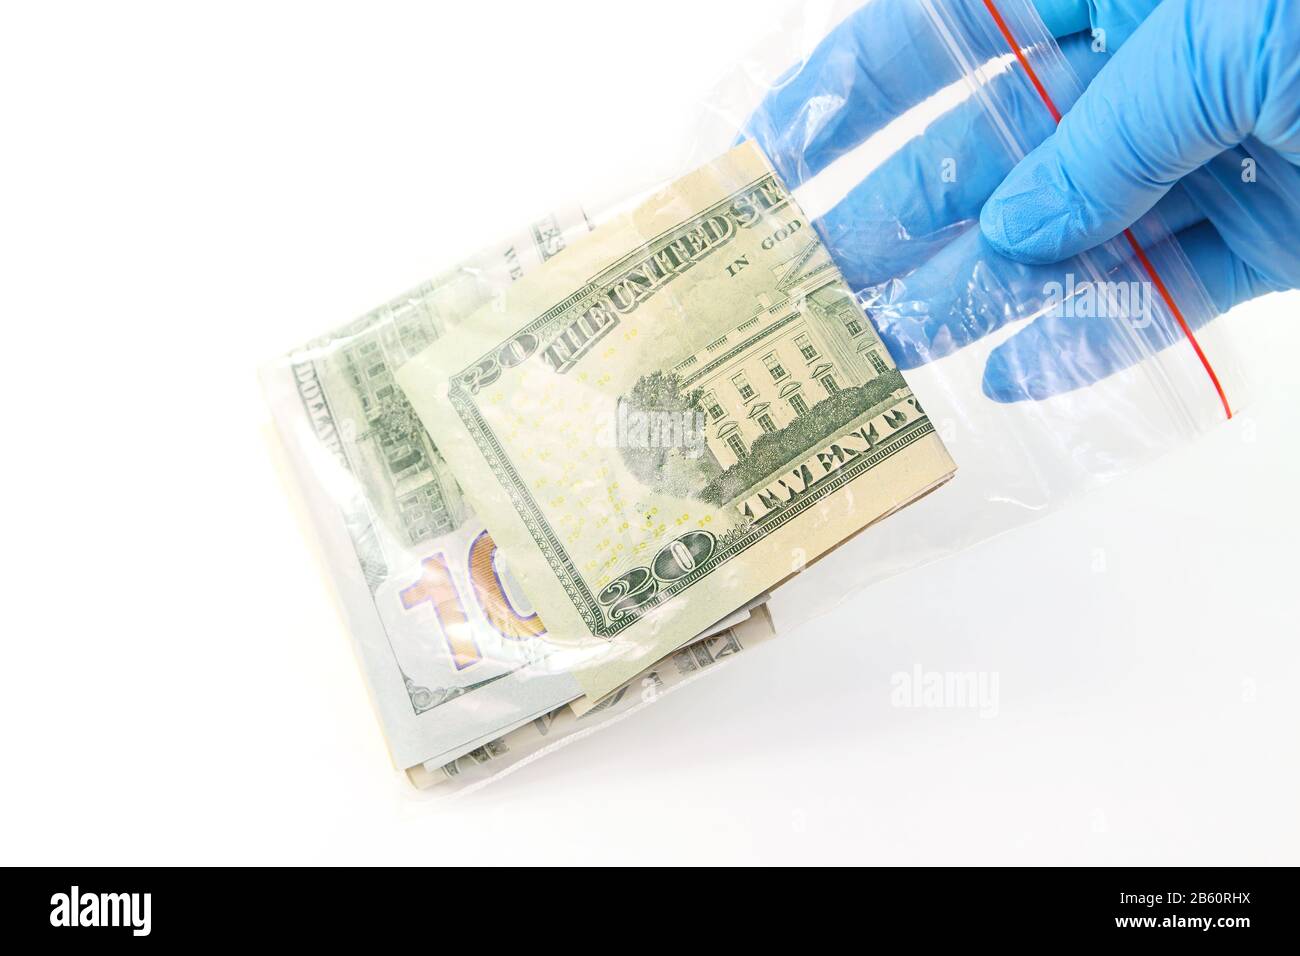 A hand in a medical glove holds a transparent plastic bag with money that is a source of infection Stock Photo